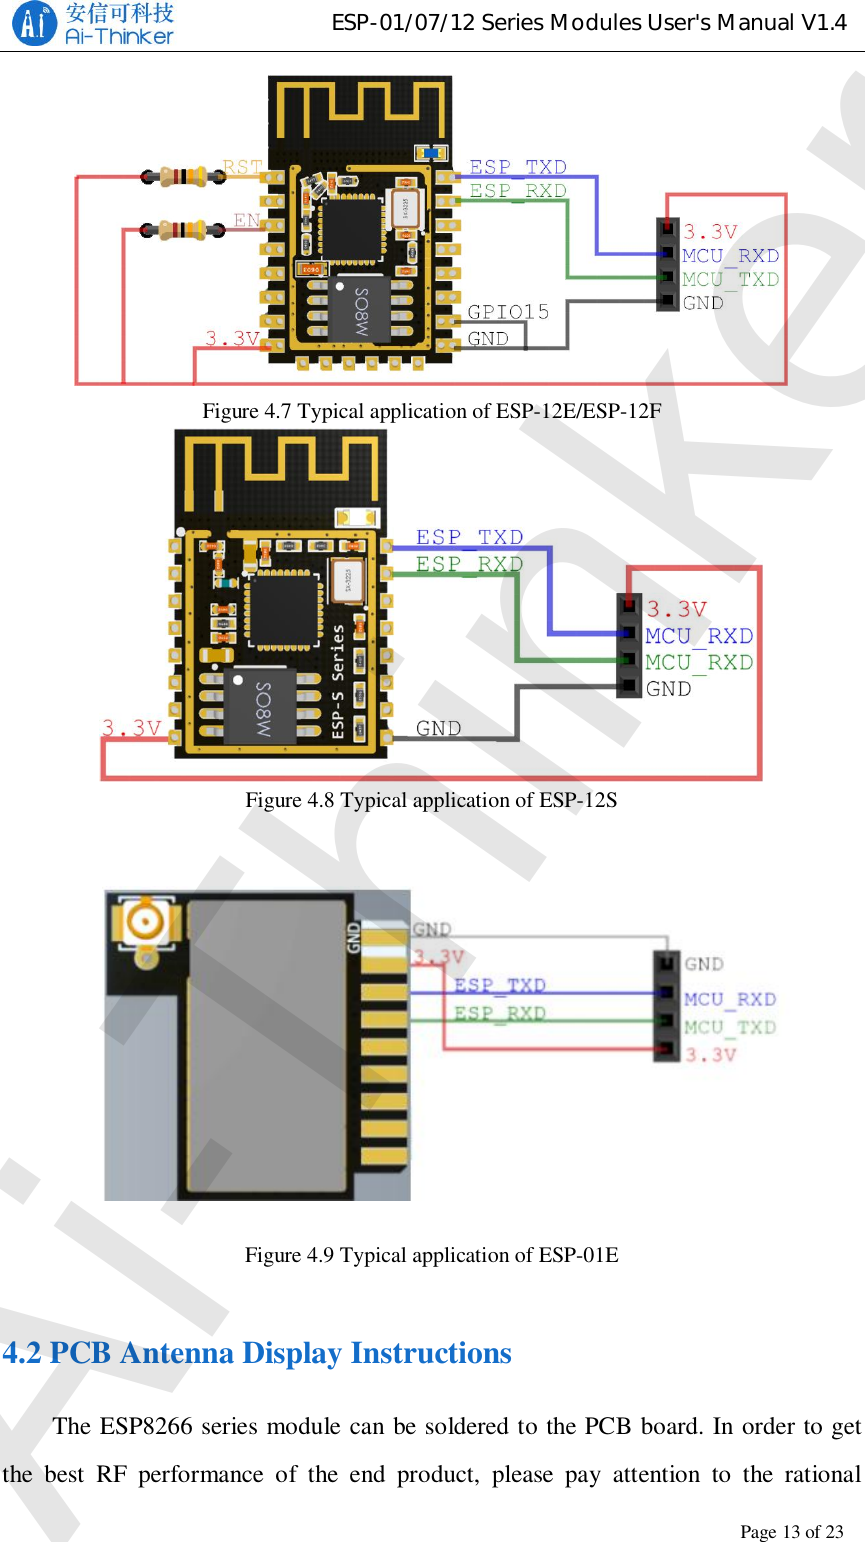 ESP-01/07/12 Series Modules User&apos;s Manual V1.4Copyright © 2017 Shenzhen Ai-Thinker Technology Co., Ltd All Rights ReservedPage13of23Figure 4.7 Typical application of ESP-12E/ESP-12FFigure 4.8 Typical application of ESP-12SFigure 4.9 Typical application of ESP-01E4.2 PCB Antenna Display InstructionsThe ESP8266 series module can be soldered to the PCB board. In order to getthe best RF performance of the end product, please pay attention to the rationalAi-Thinker